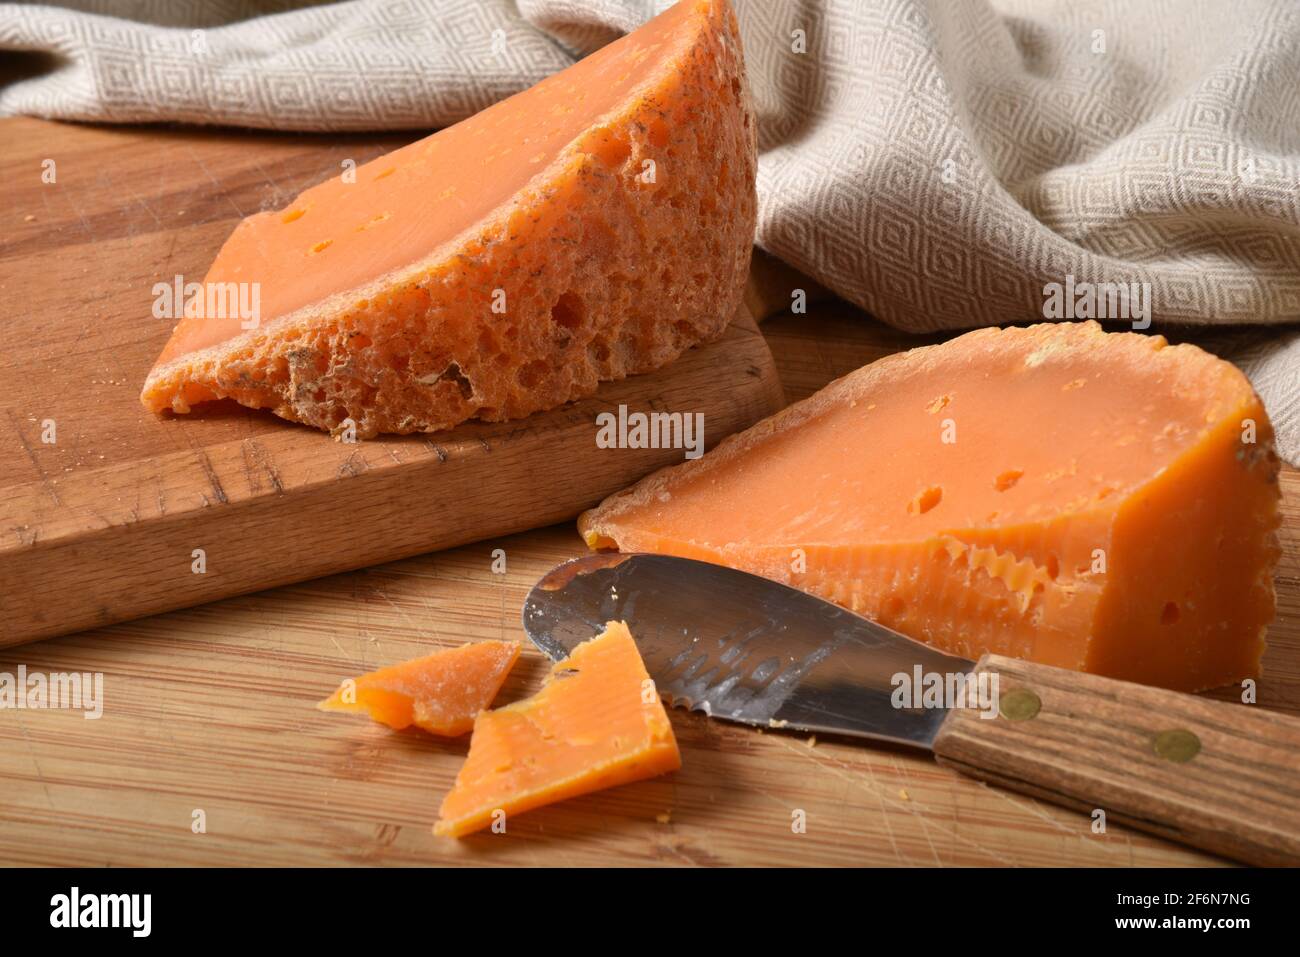 A wedge of gourmet mimolette cheese with a cheese knife on a cutting board Stock Photo